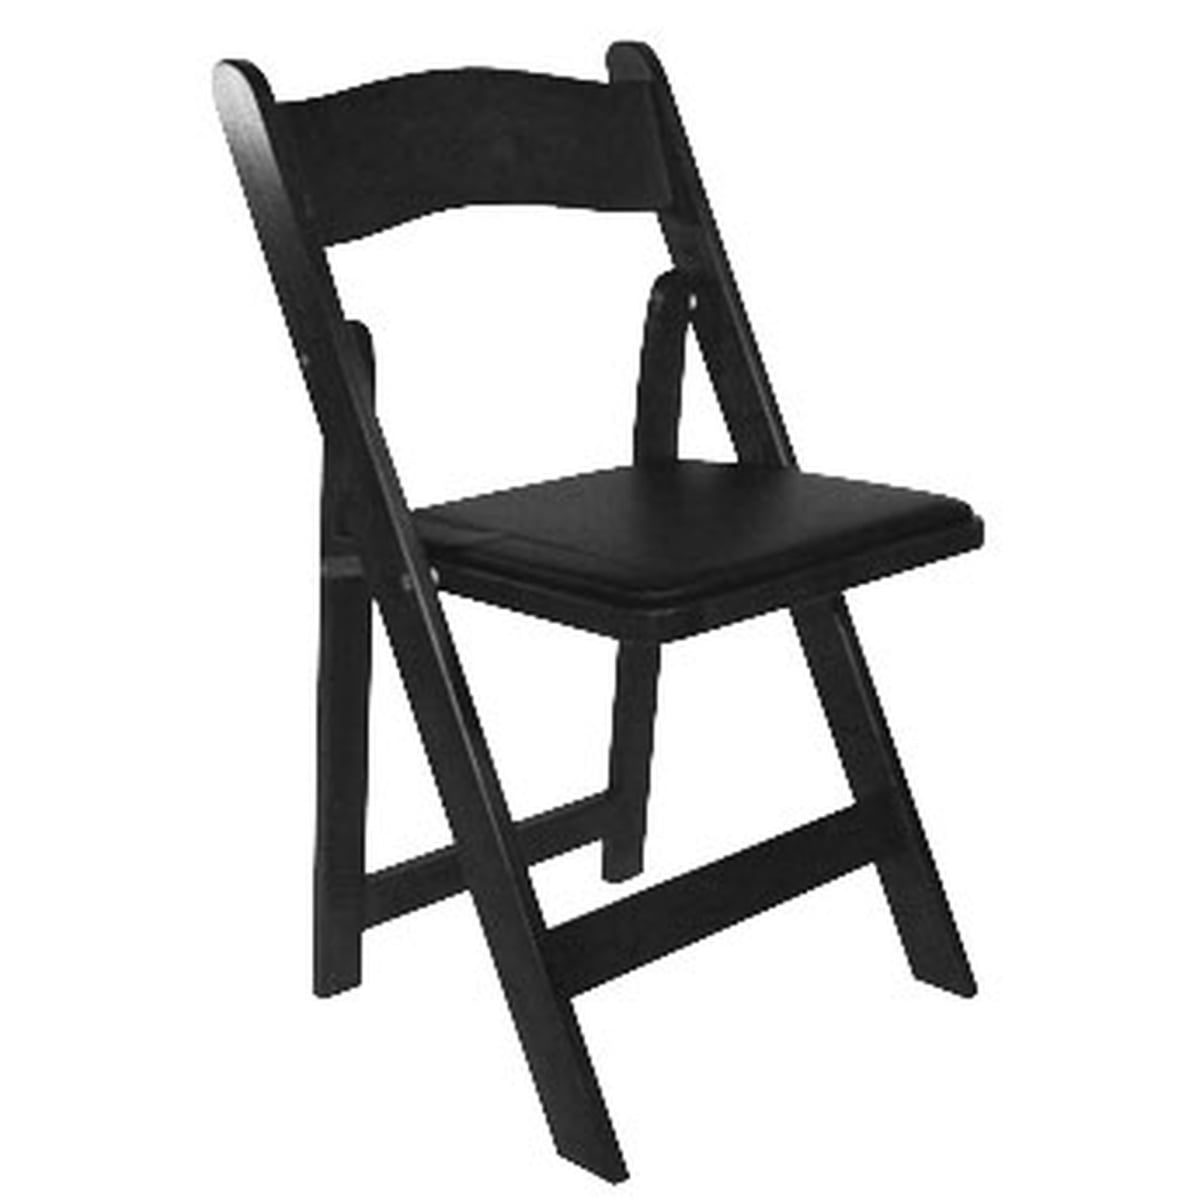 Picture of Commercial Seating Products A-101-BK-4 American Classic Black Wood Folding Chair - 30.5 in. - Set of 4